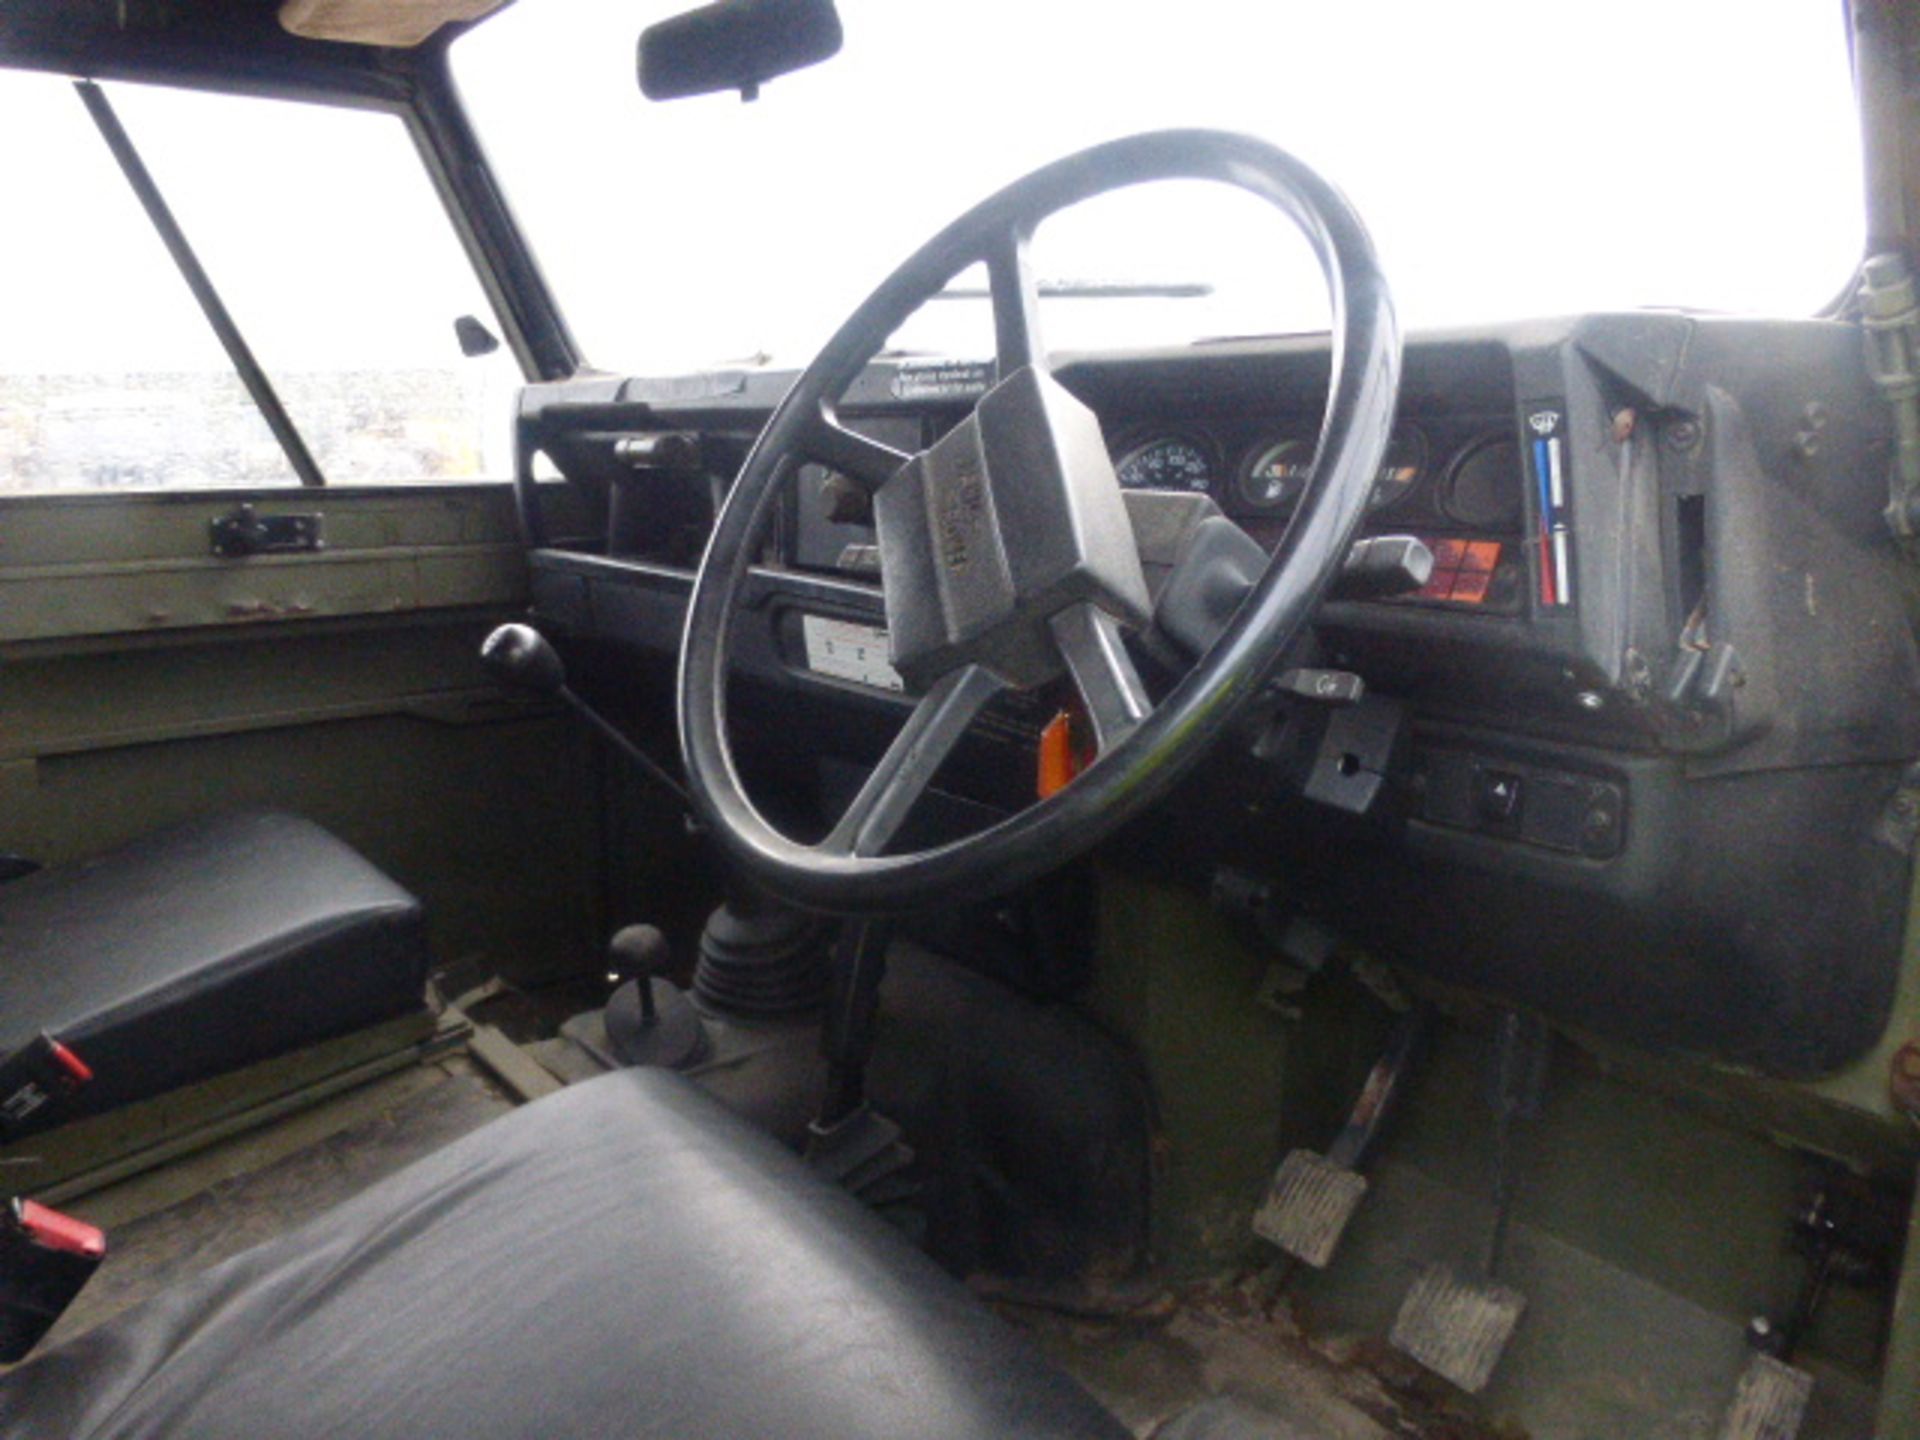 Land Rover 110 soft top with rear seats, RHD, 2.5 N/A diesel engine, Wolf wheels, etc. 22,000 KMs. - Image 4 of 4